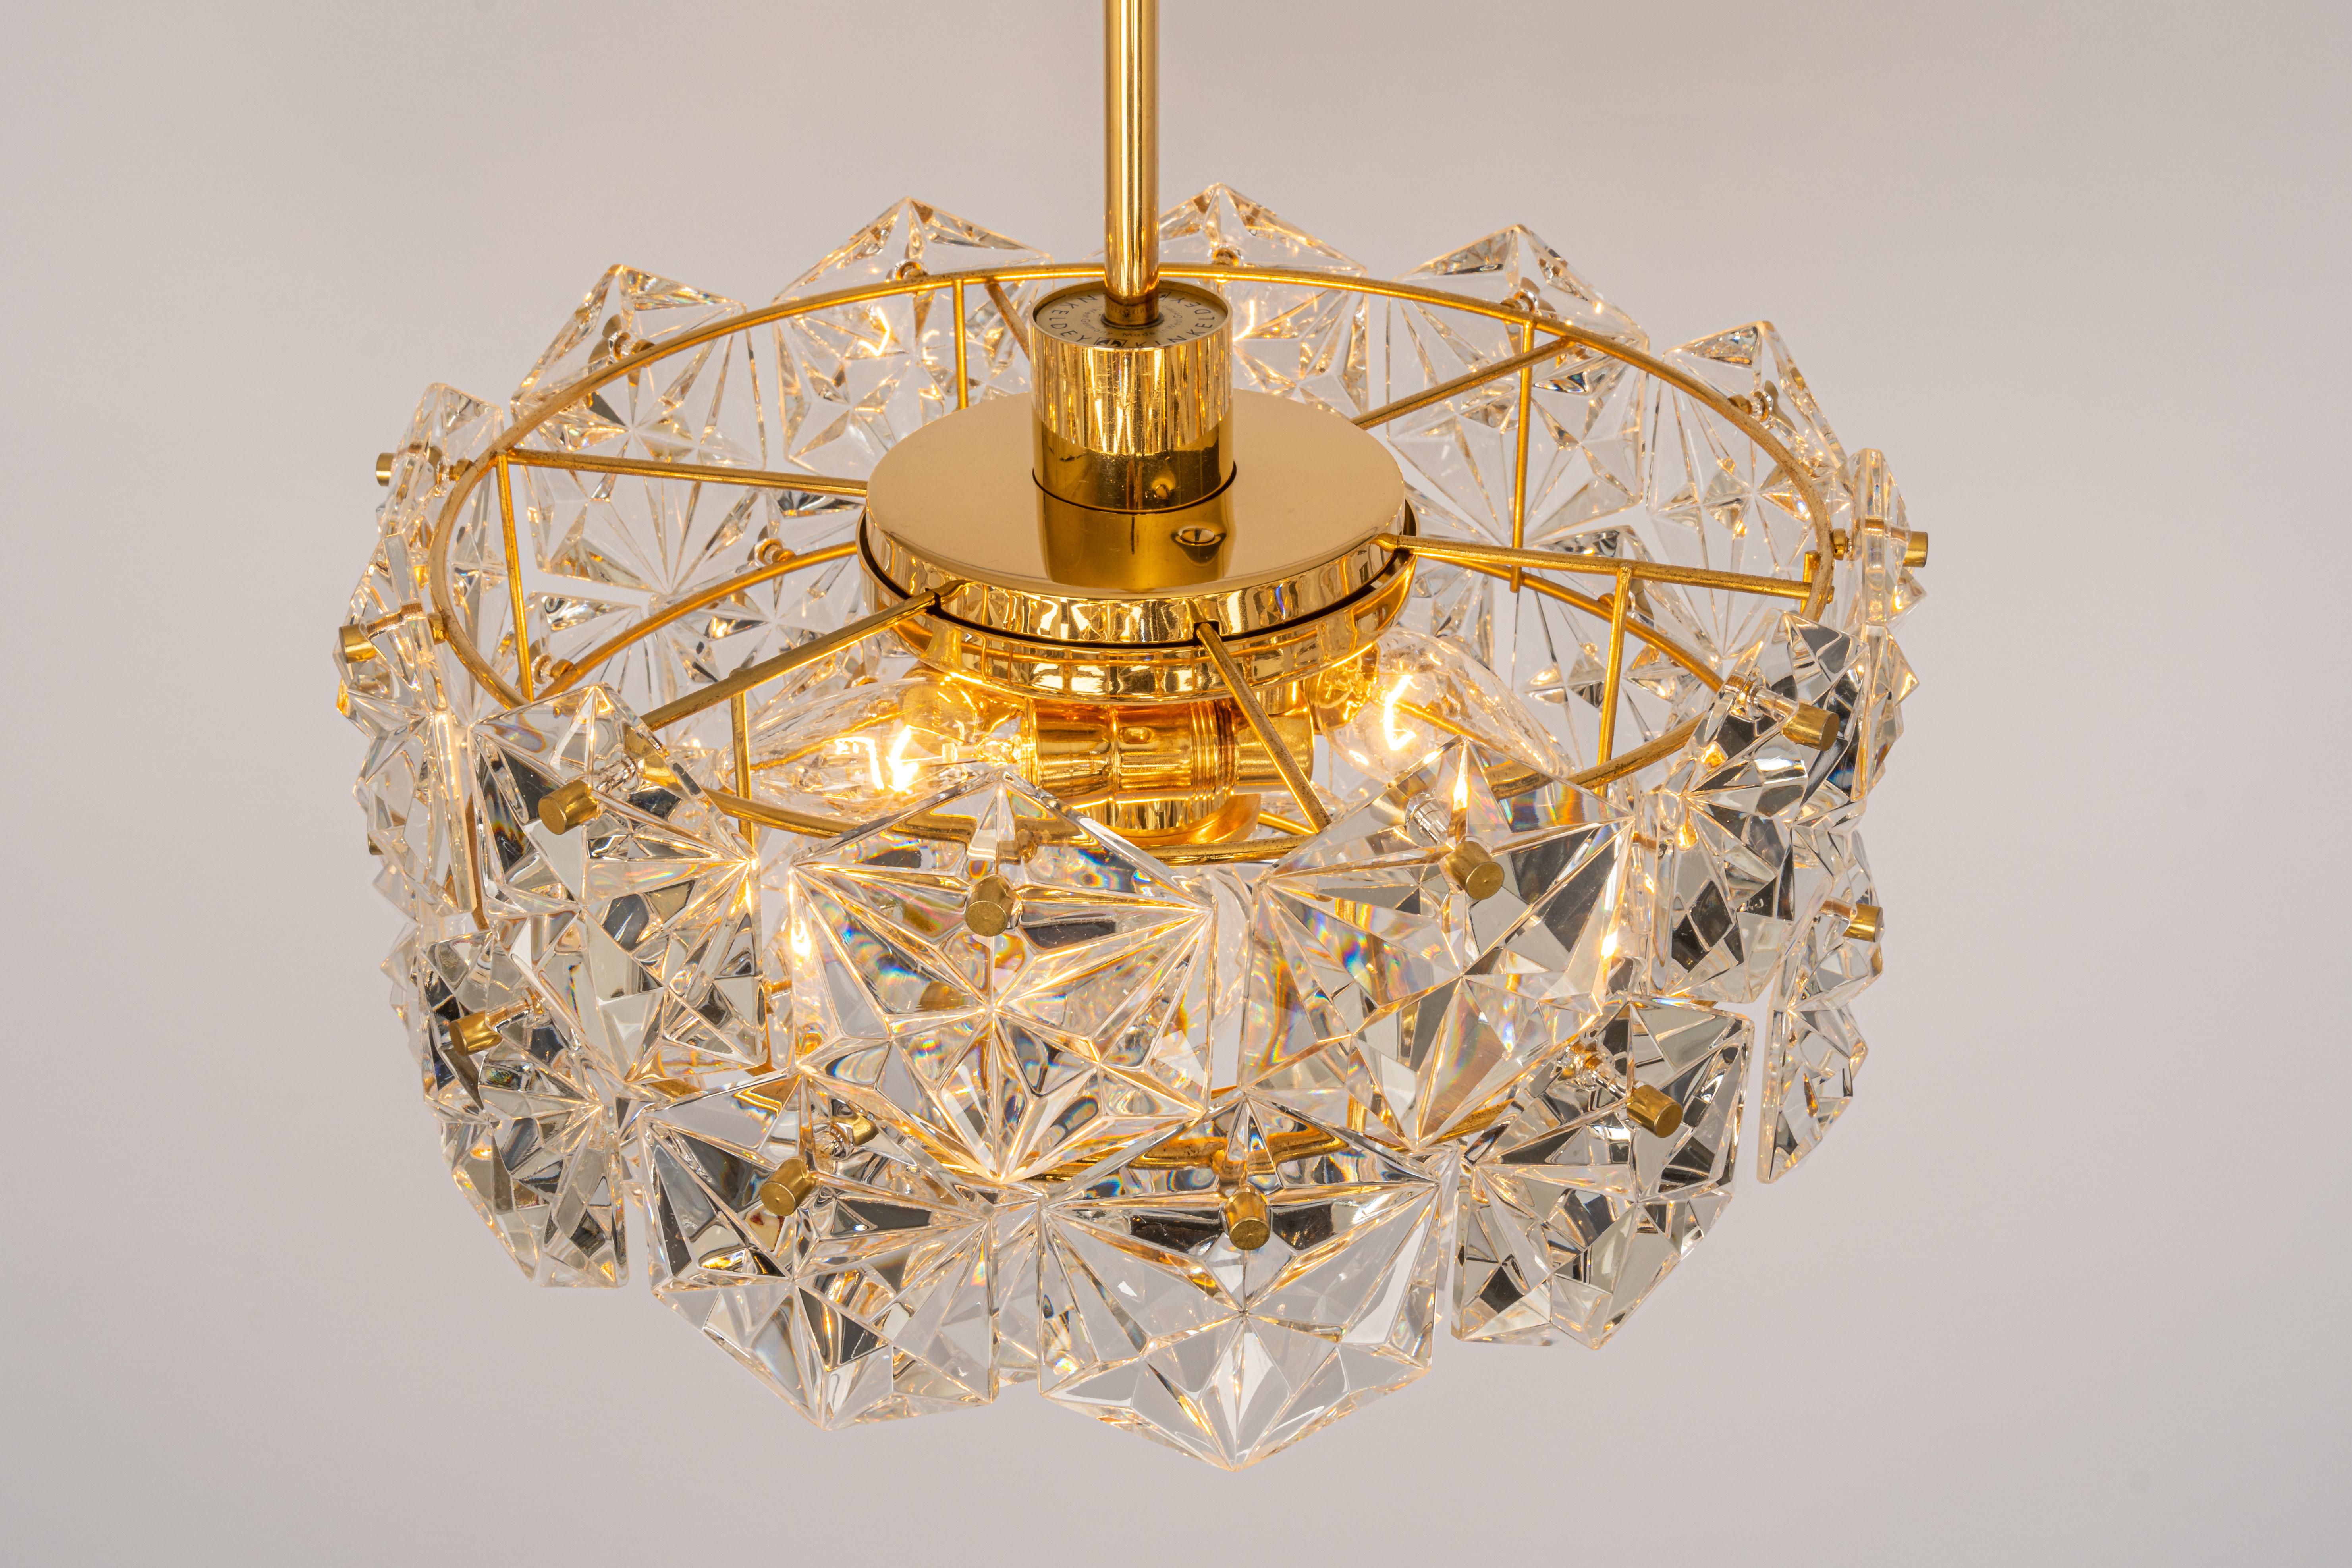 Mid-Century Modern 1 of 3 Petite Chandeliers, Brass and Crystal Glass by Kinkeldey, Germany, 1970s For Sale